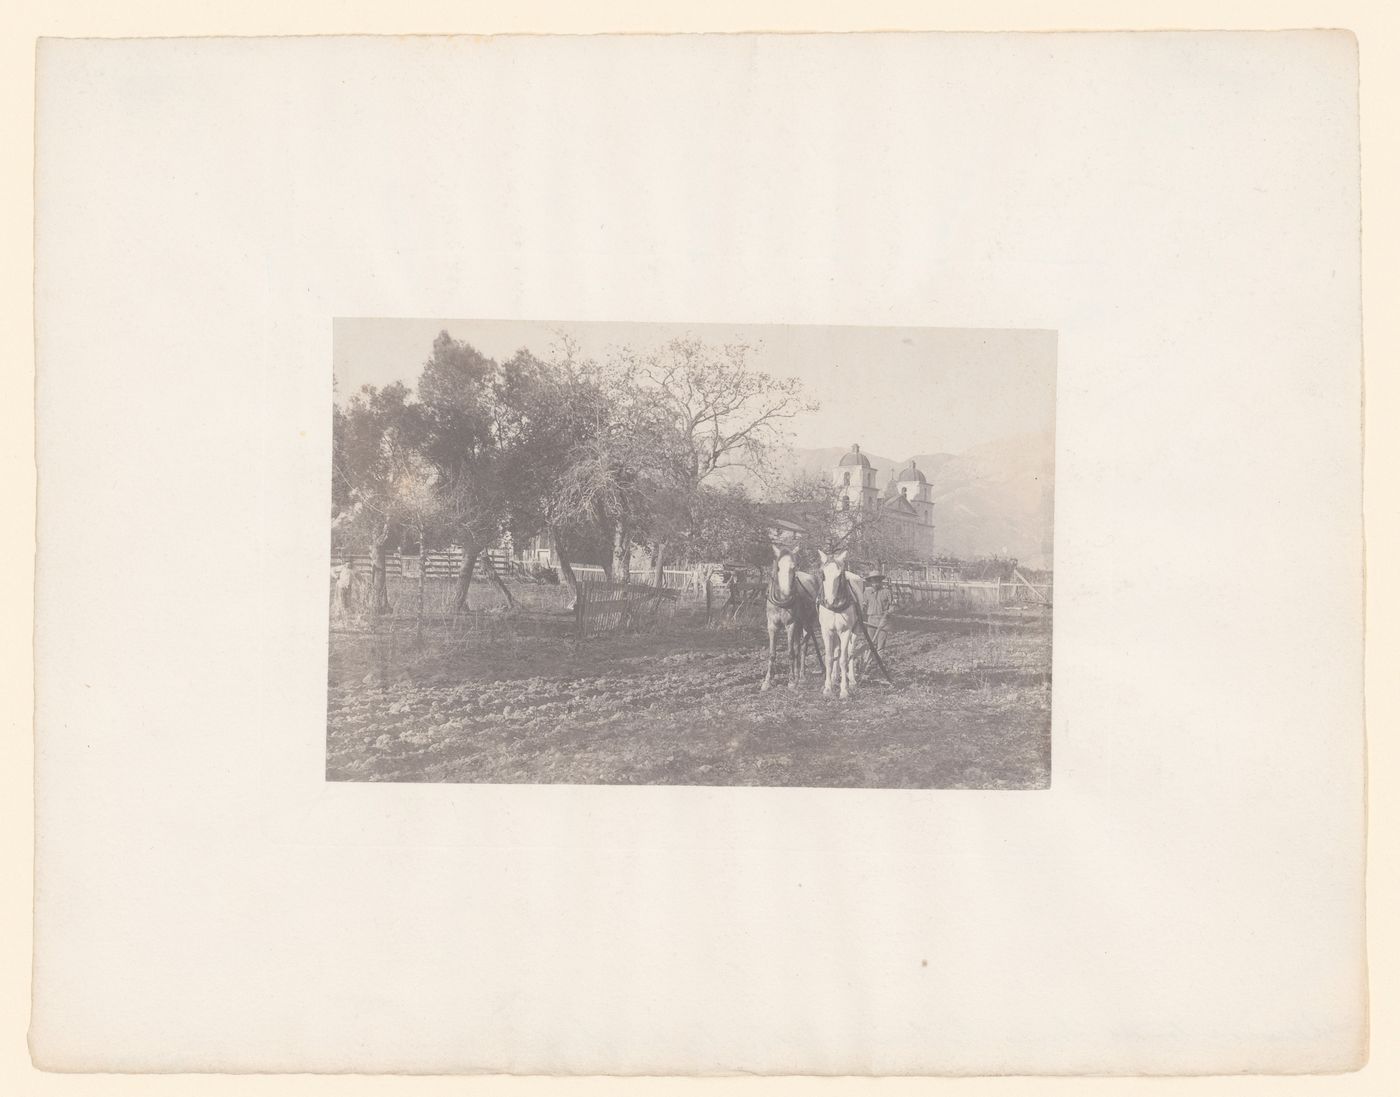 View of the Mission Santa Barbara, with an Indigenous, possibly Chumash, person ploughing mission garden with church in the background, Santa Barbara, California, United States